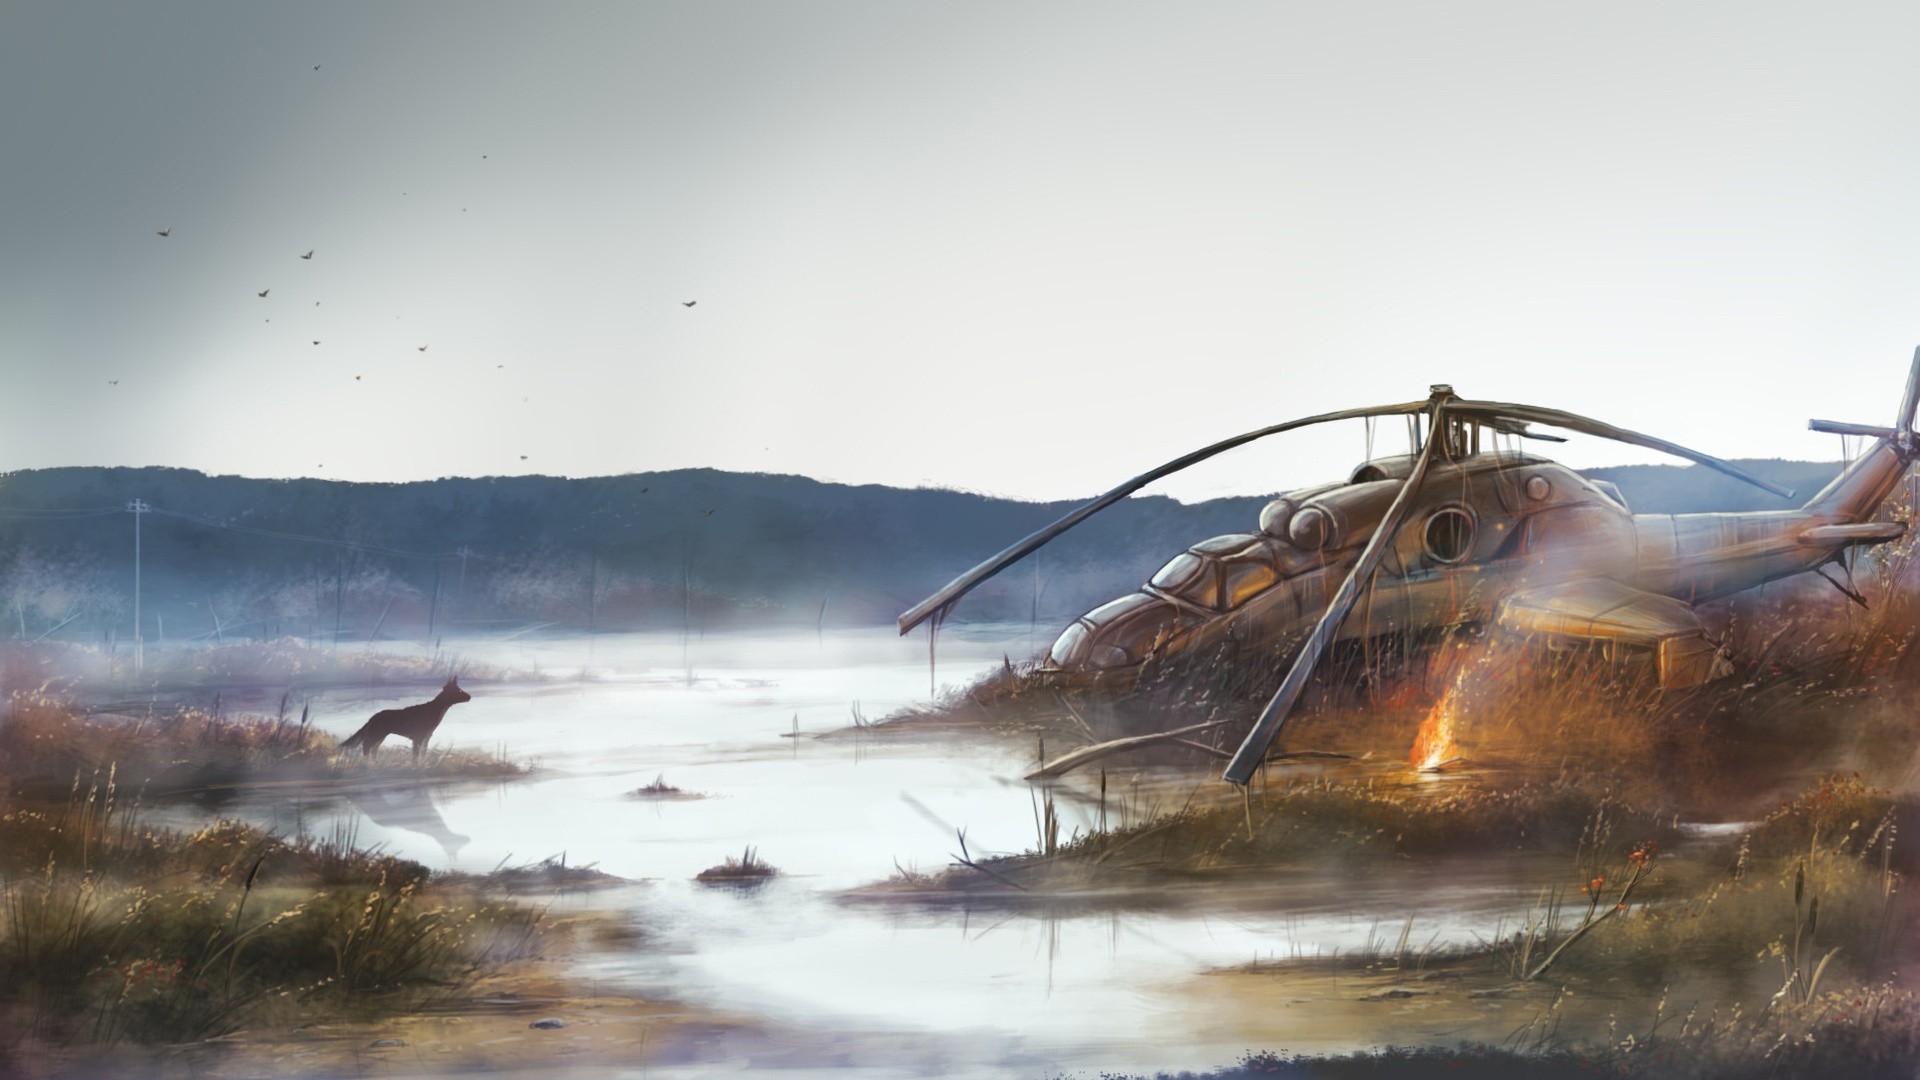 Digital Art Nature Helicopters Wreck Apocalyptic Animals Dog Fire Mist Plants Birds S T A L K E R Vi 1920x1080